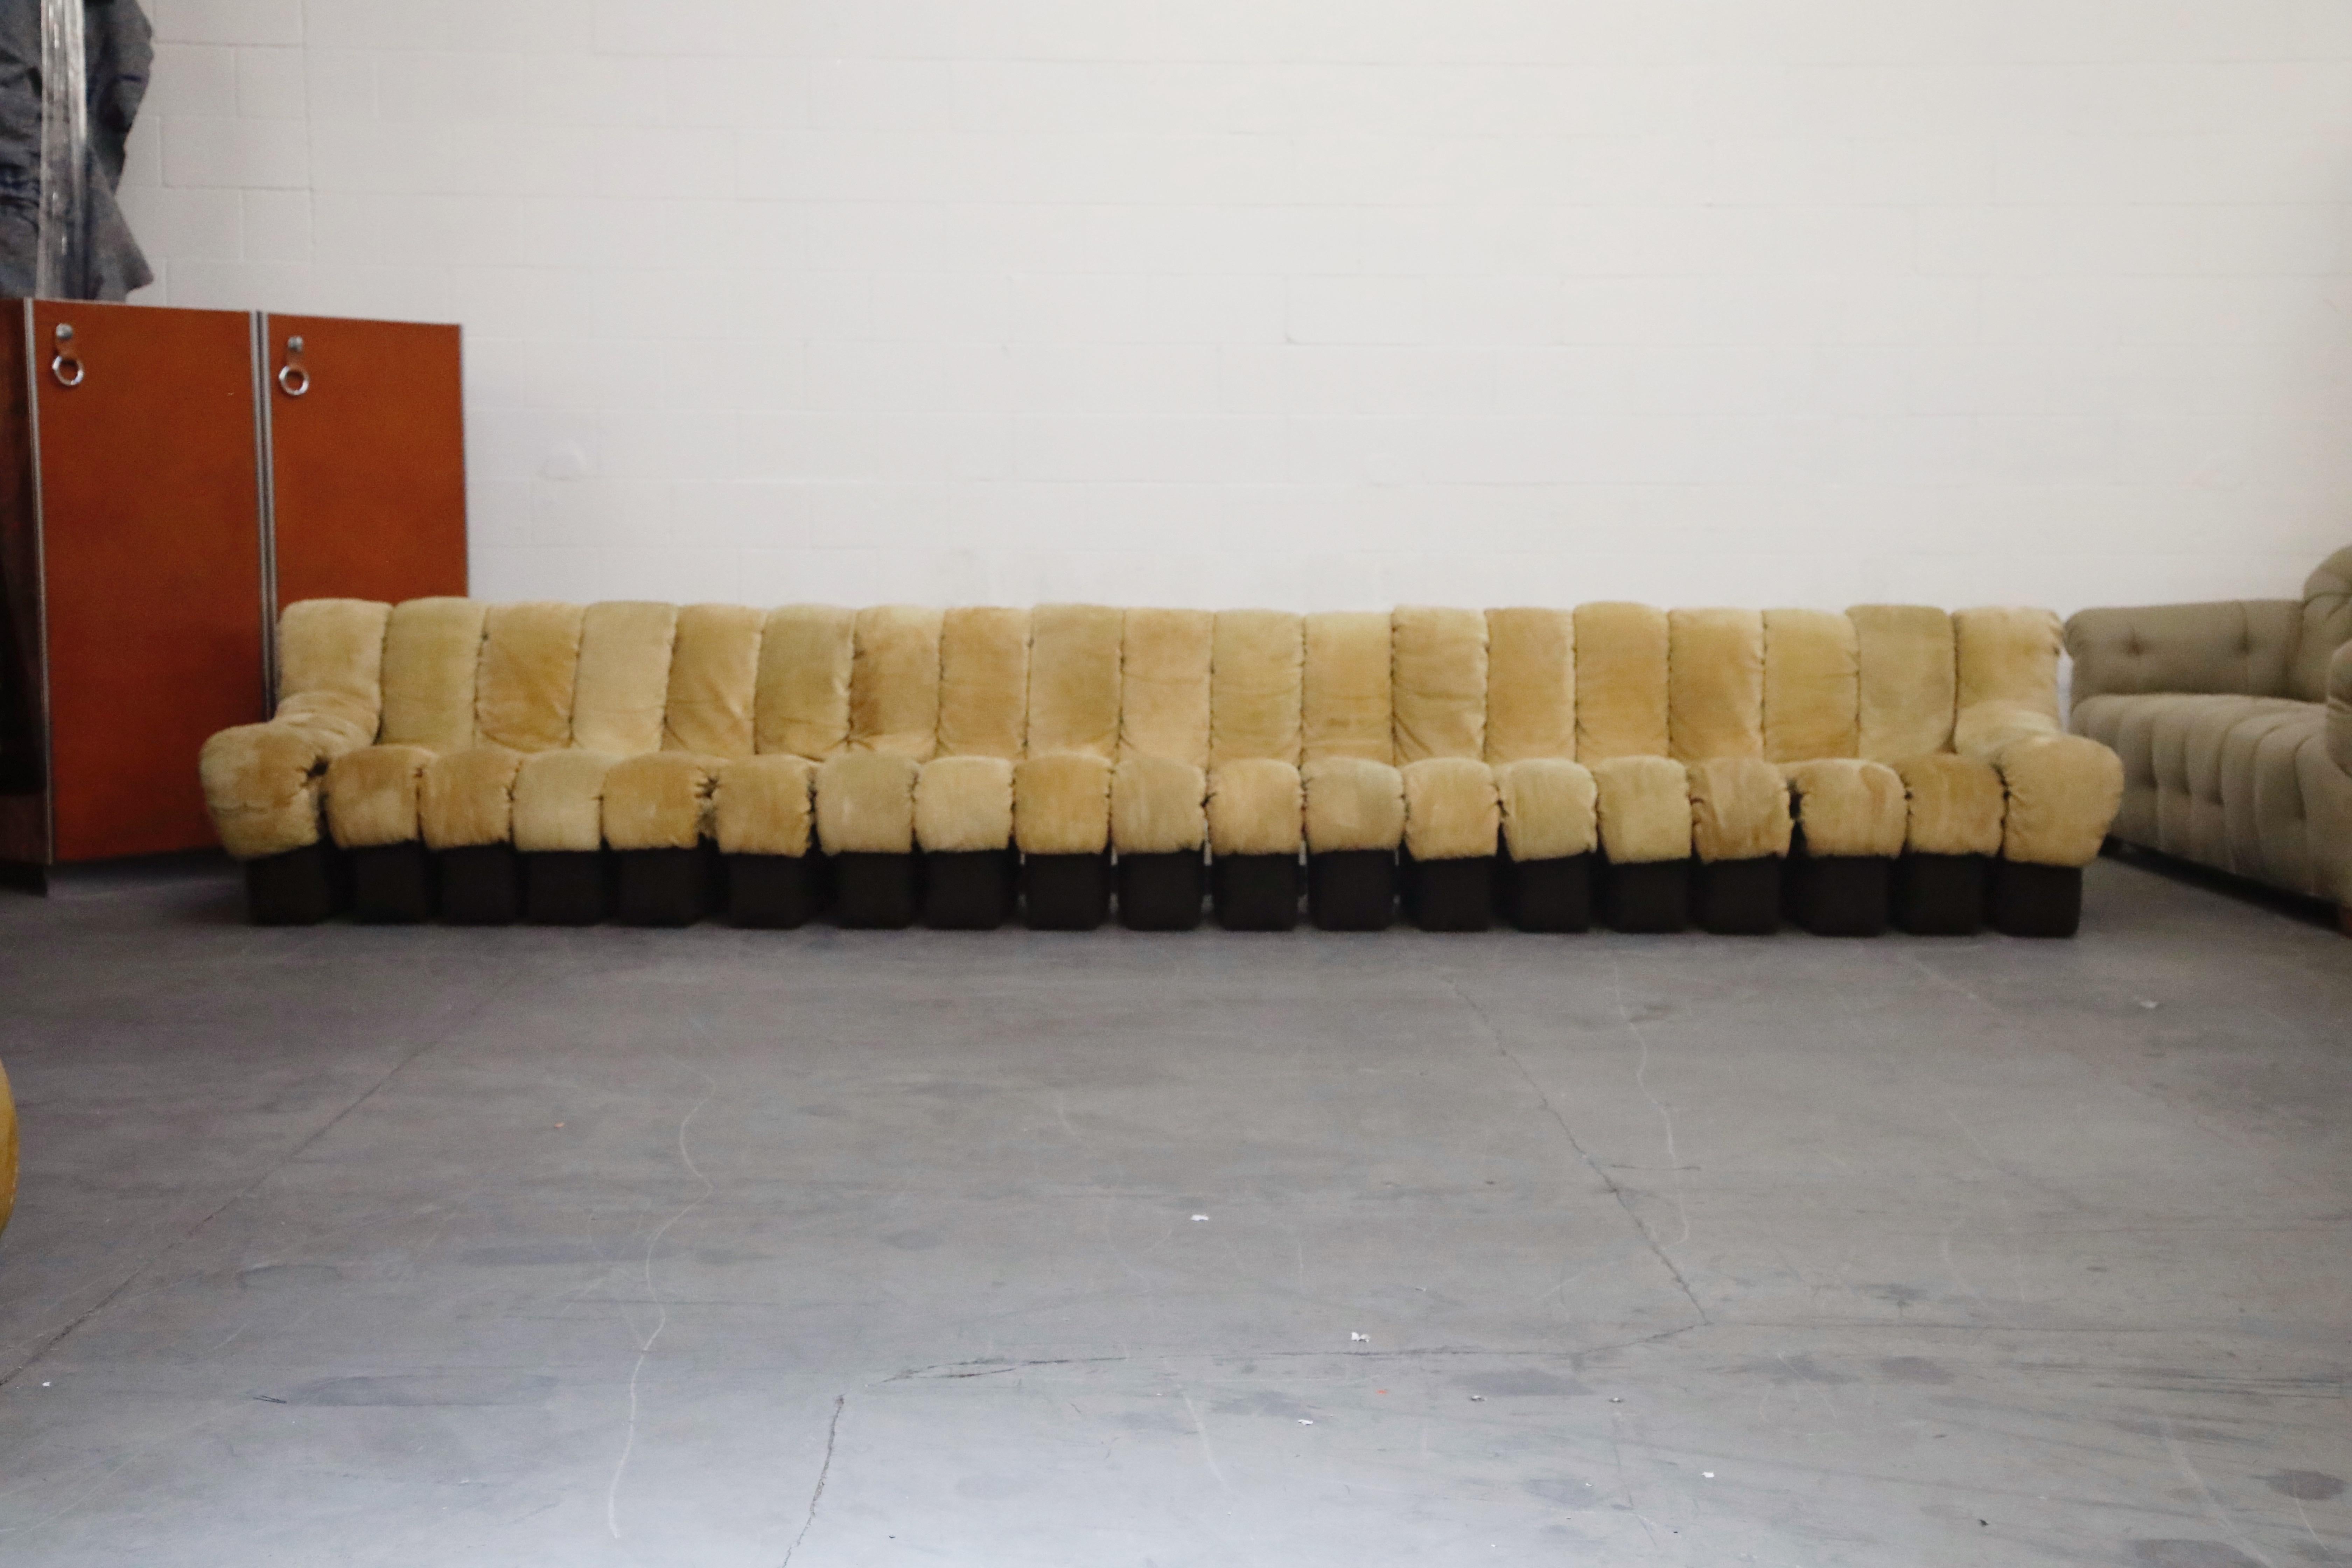 This classic 'Non-Stop Sofa' by Swiss maker De Sede in a distressed tan suede is priced low to allow you to either use as-is in its moderately distressed condition or reupholster to a new fabric or leather of your choosing. Most sections are signed